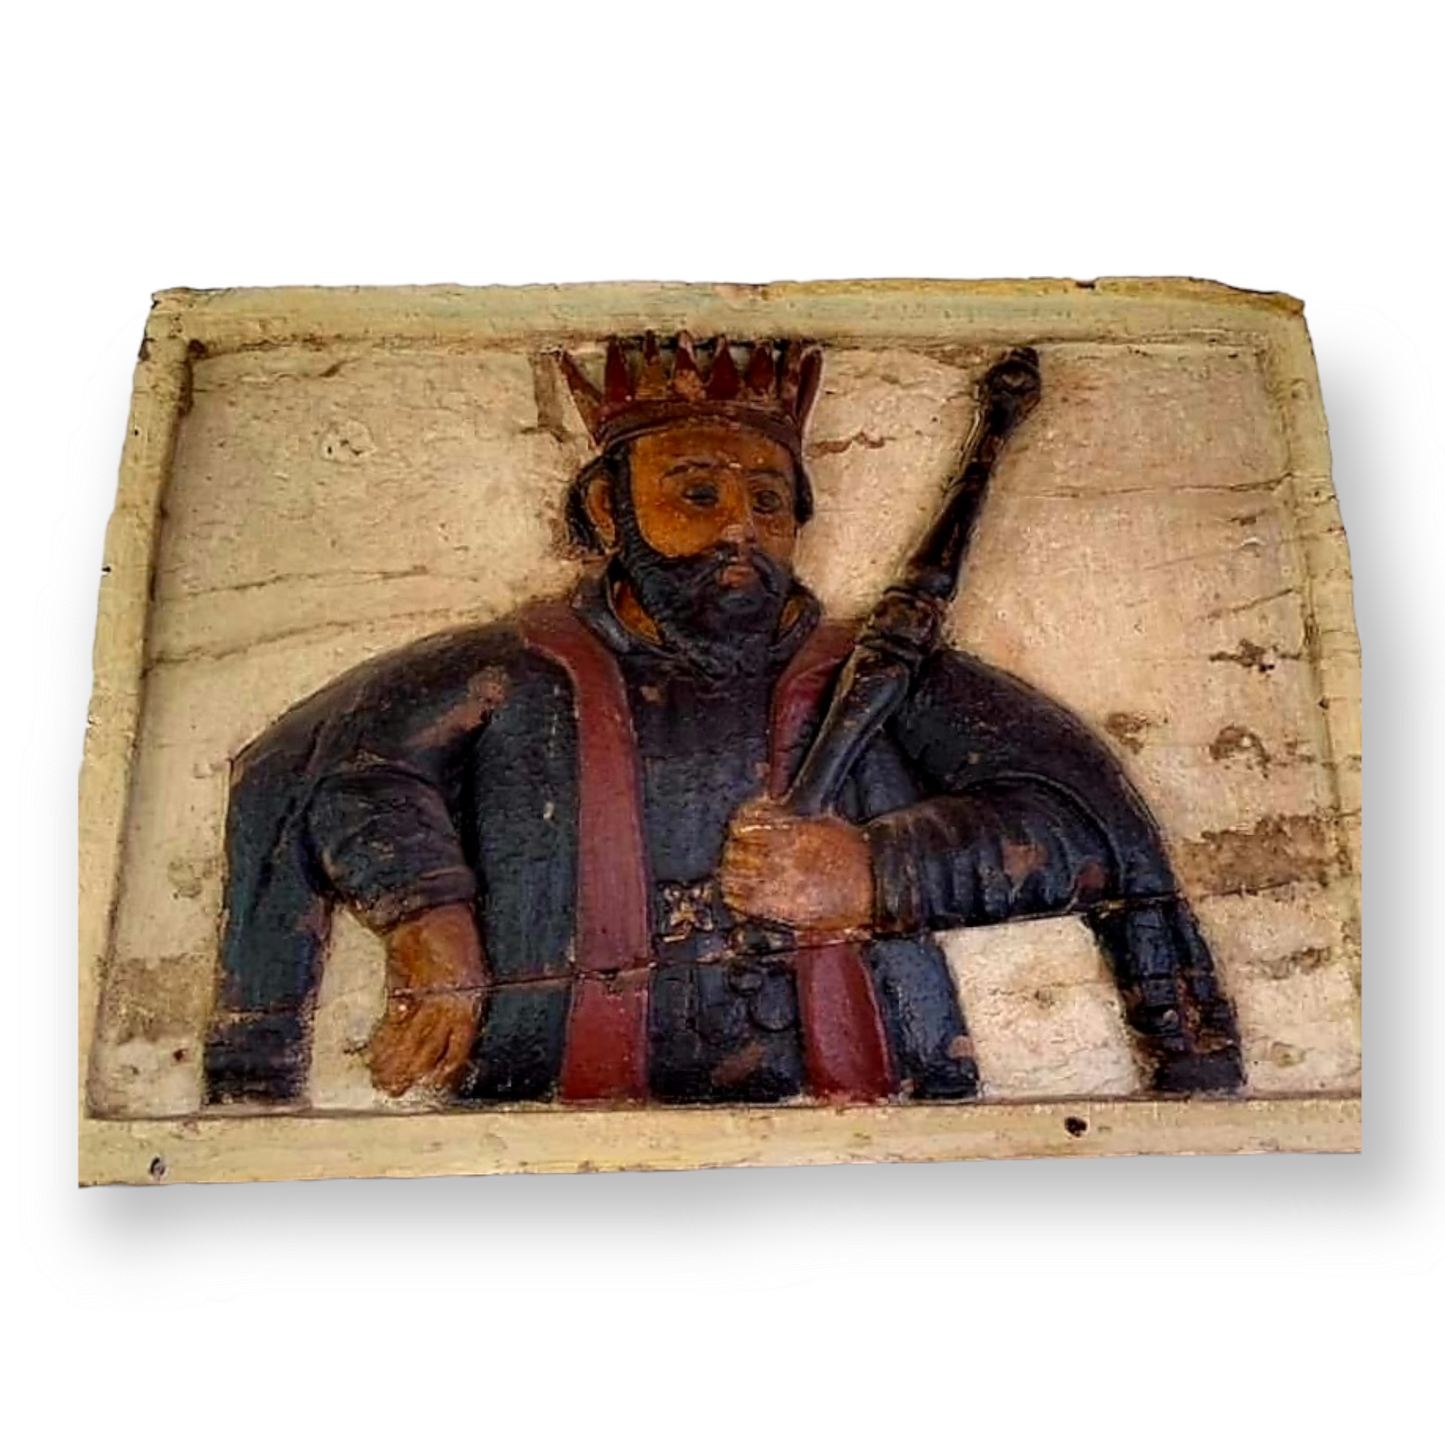 Large Mid 17th Century Indo-Portuguese Antique Carved Wooden Panel Depicting a King or Saint